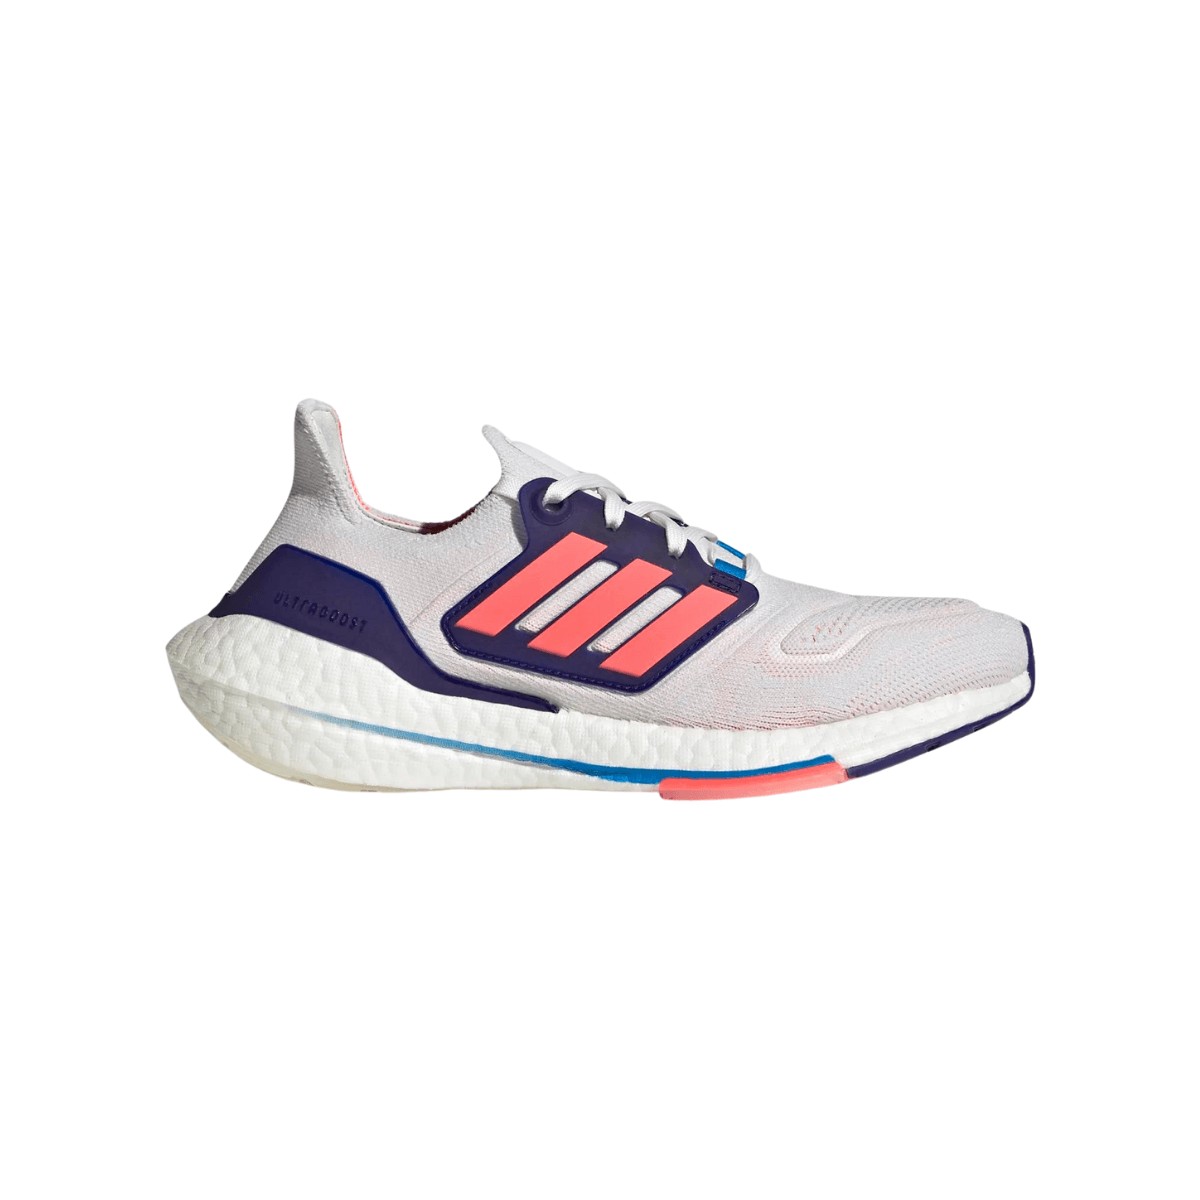 Chaussures Adidas Ultraboost 22 Blanc Femme, Taille UK 6